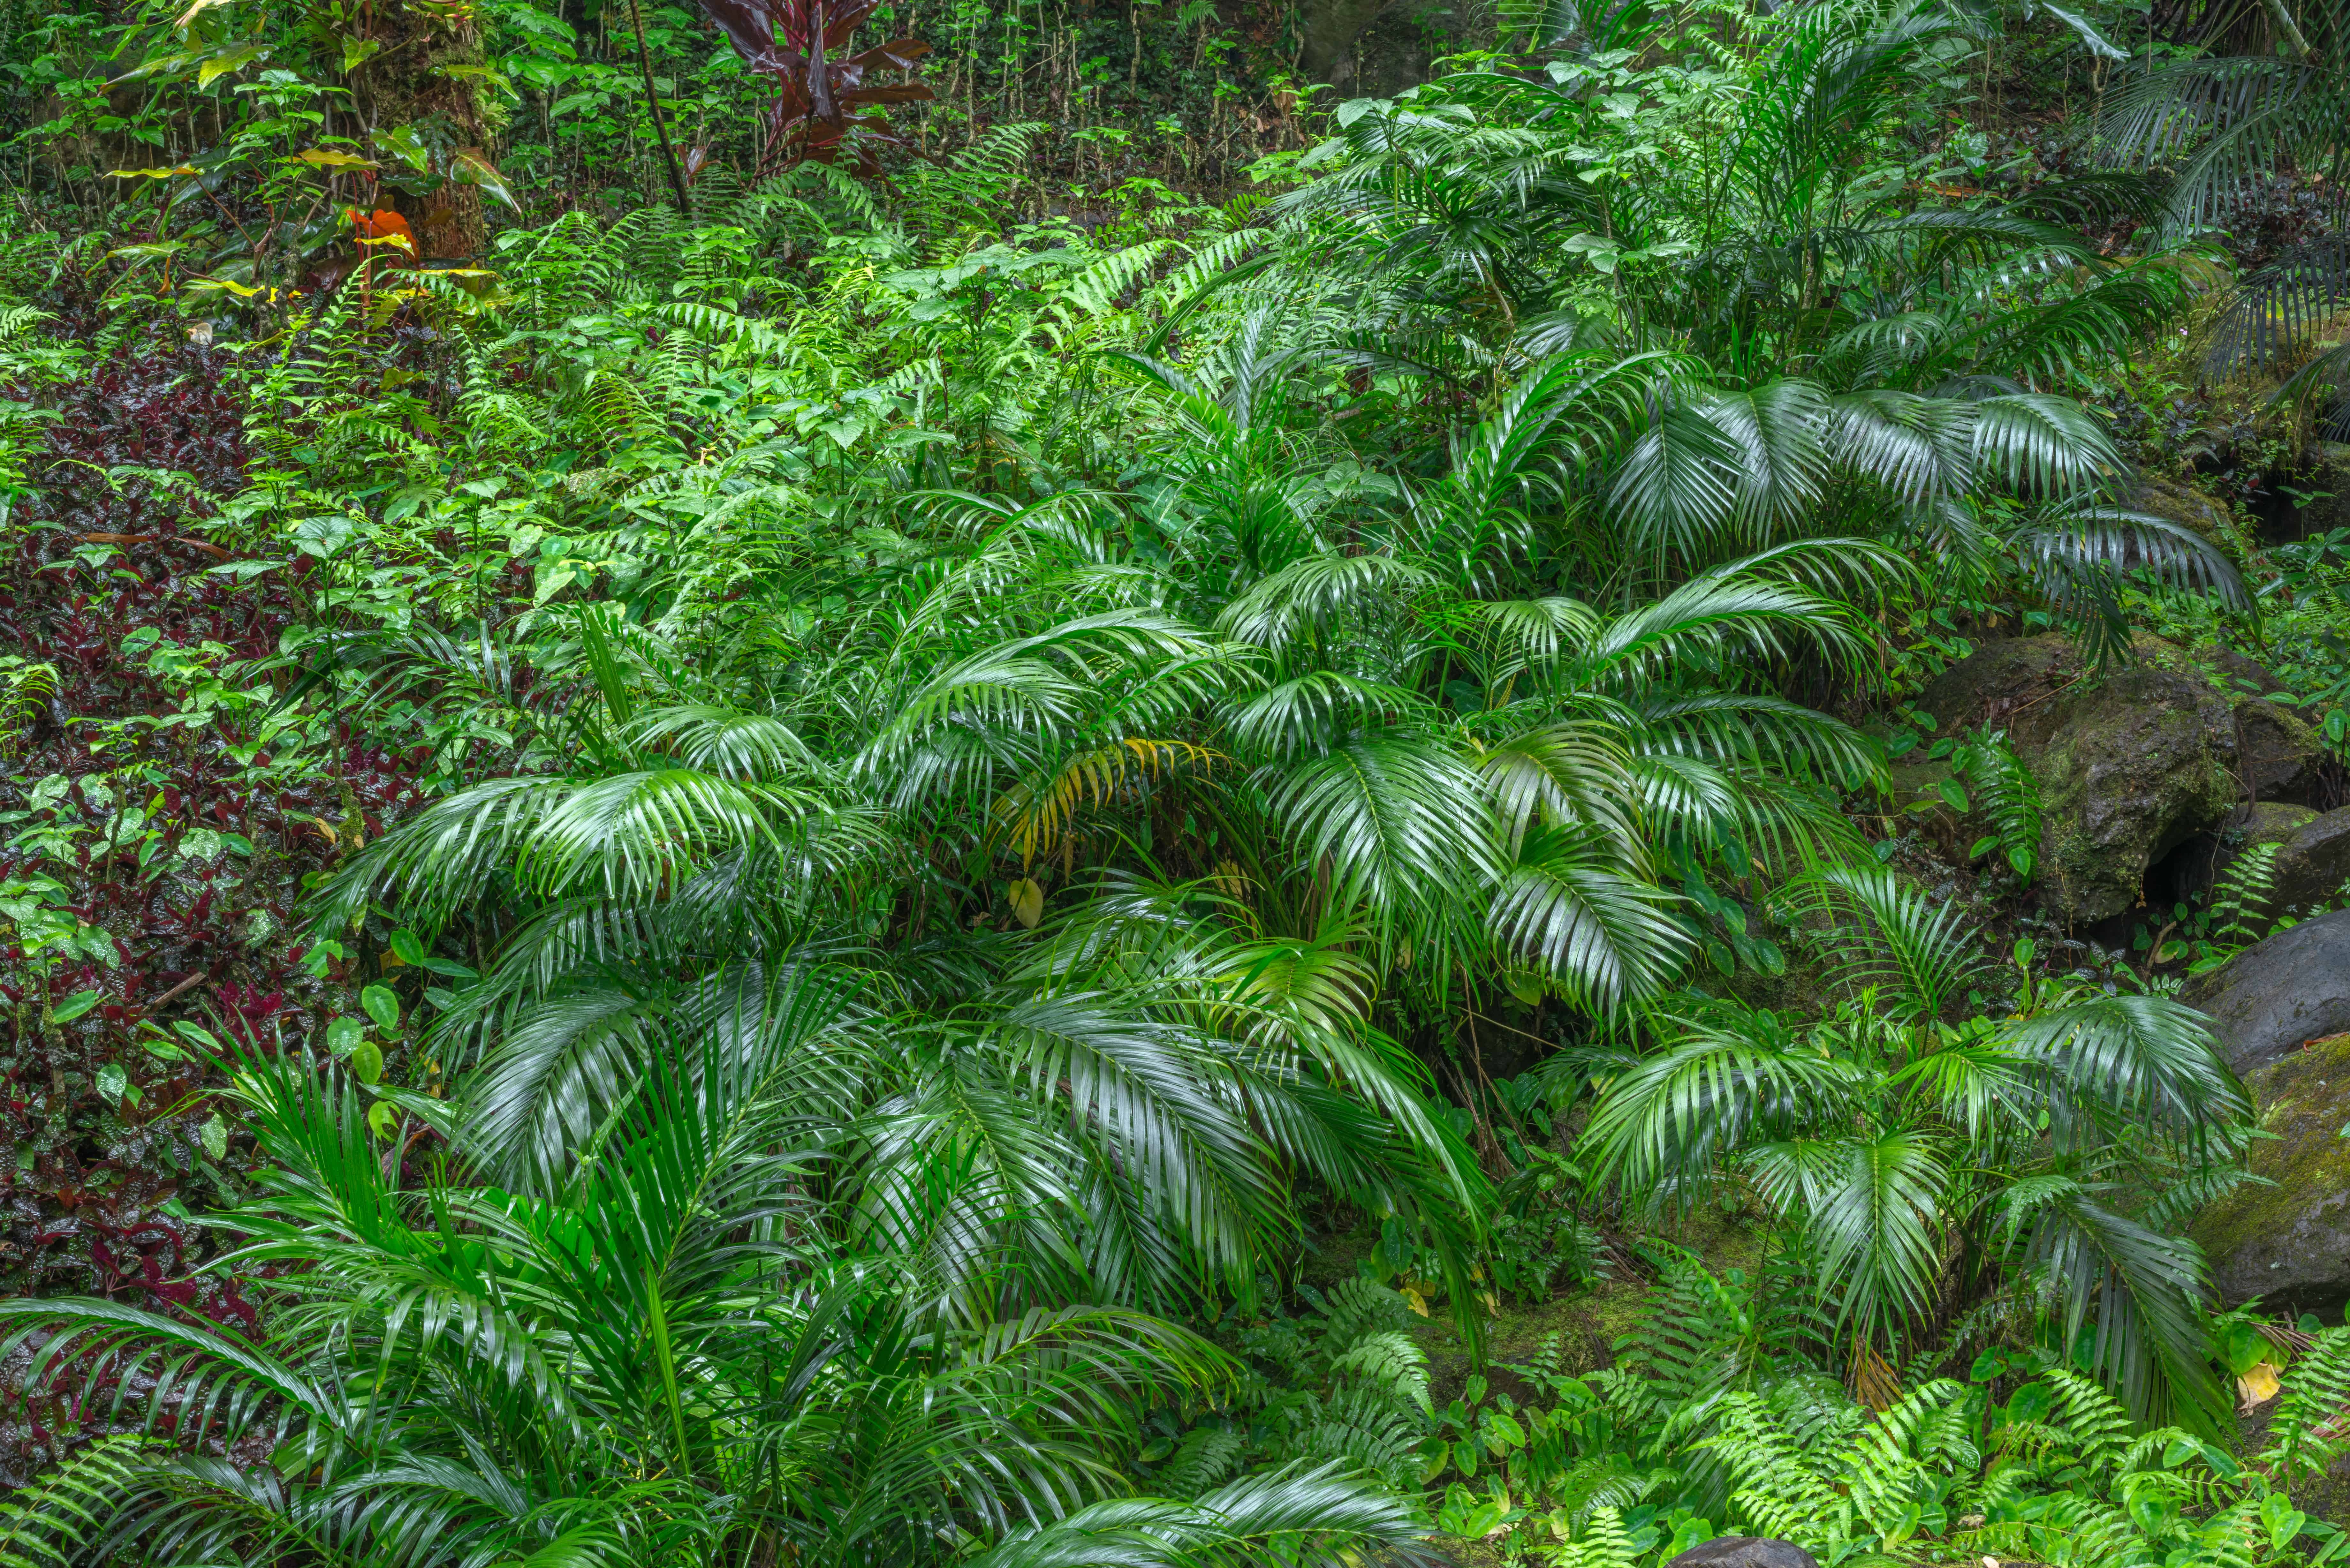 A Chamaedorea cataractarum or cat palm growing in a forest with a number of other tropical plants.